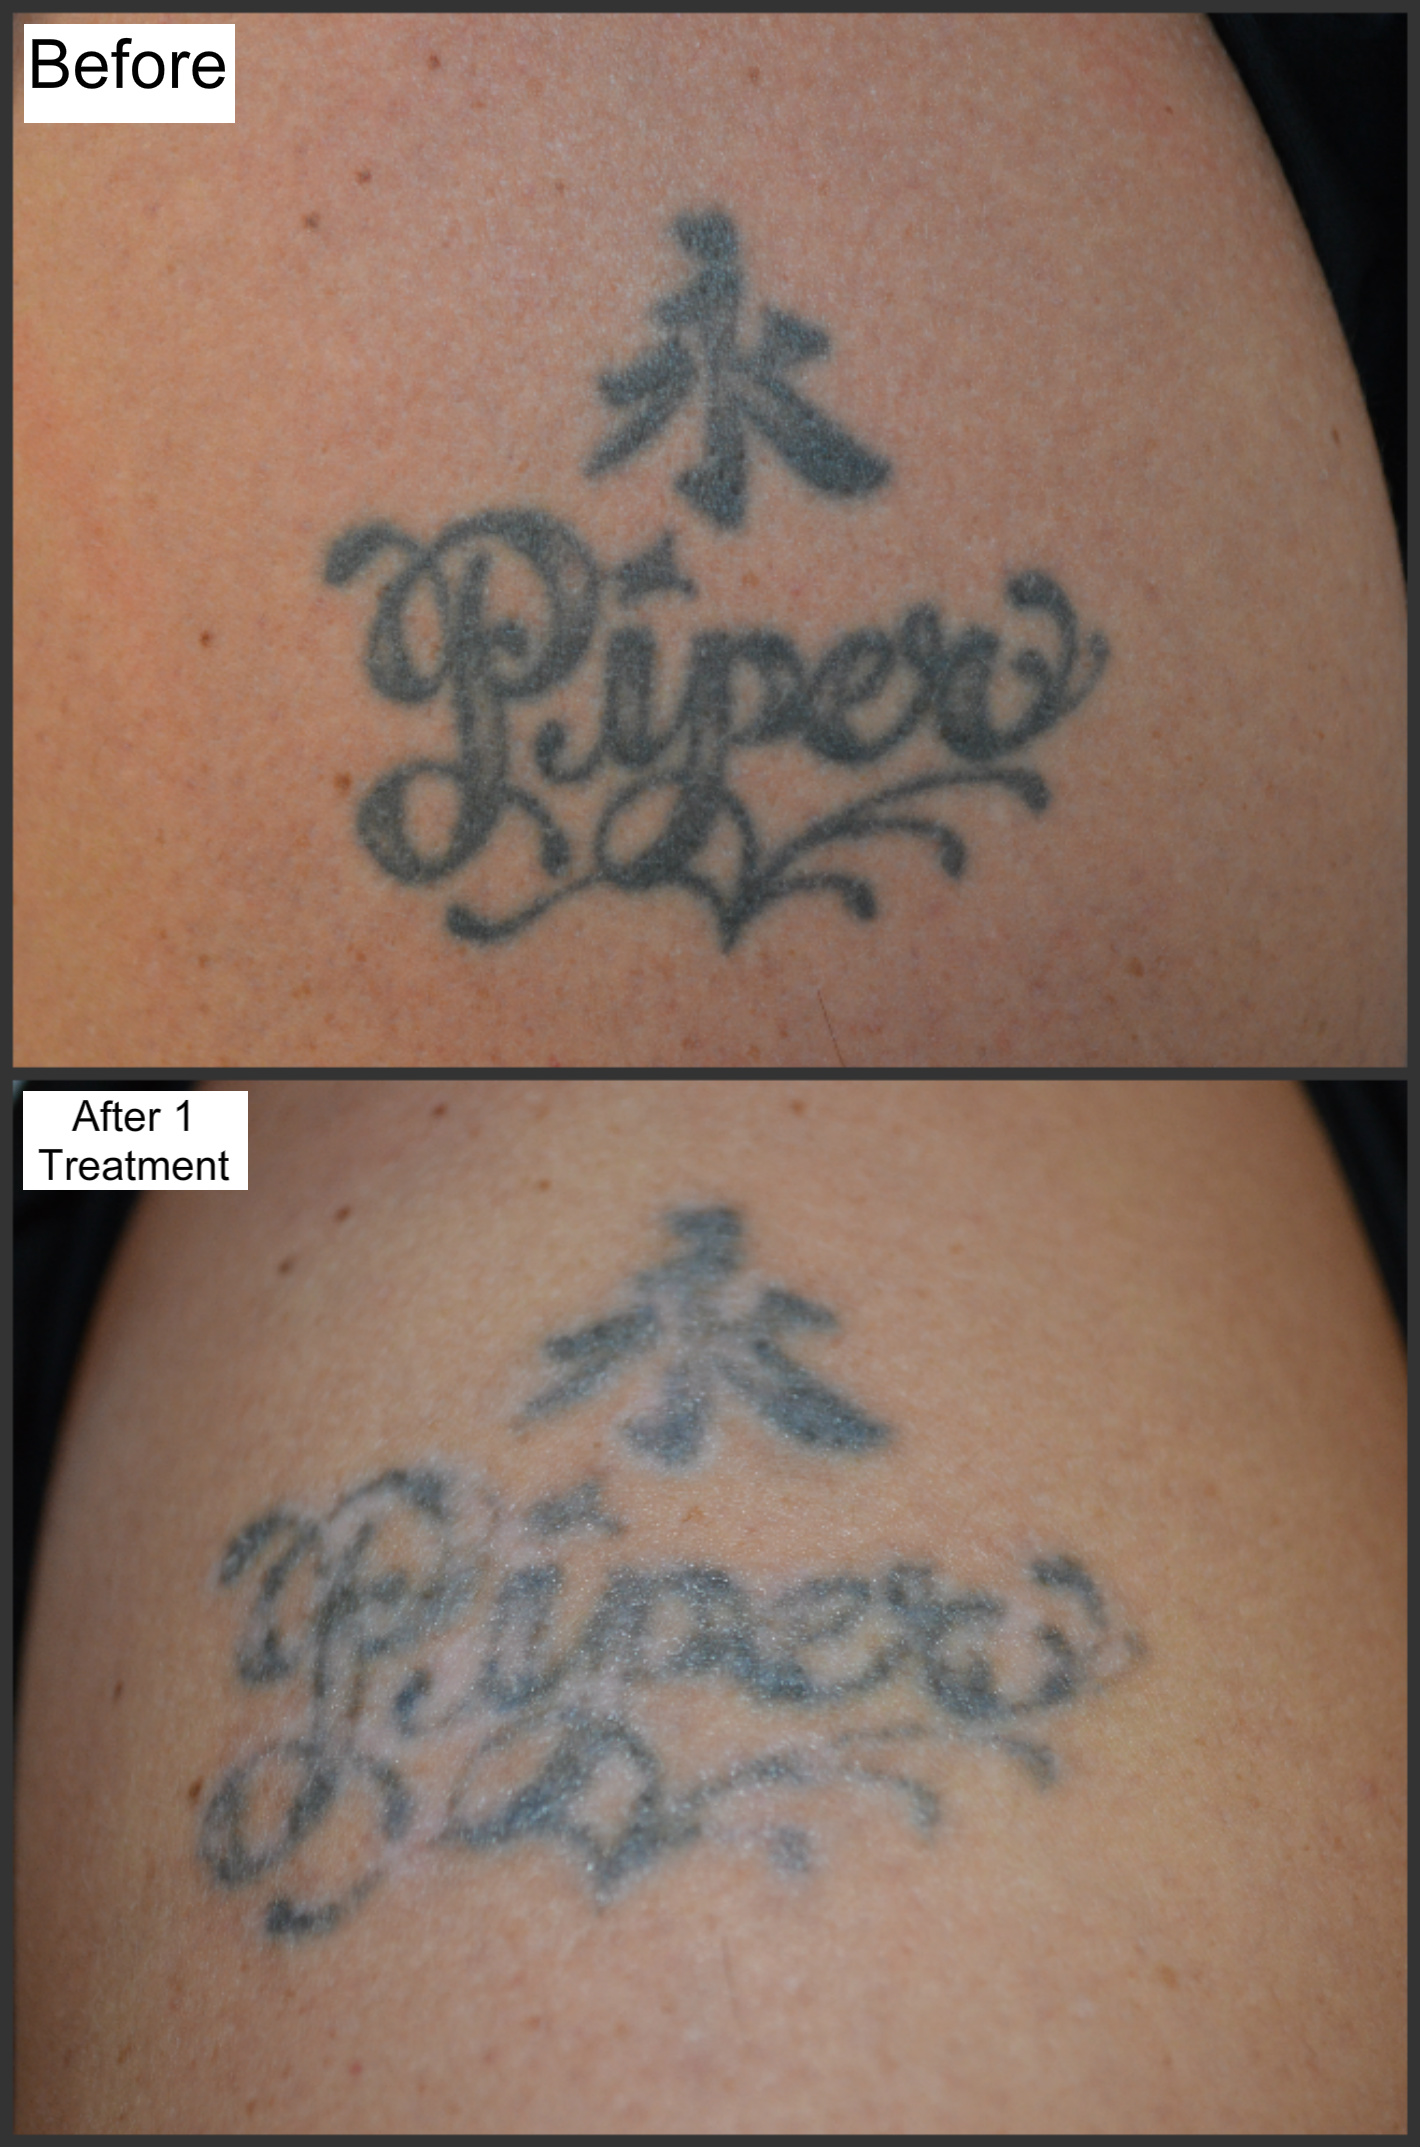 Best Ways to Avoid Tattoo Removal